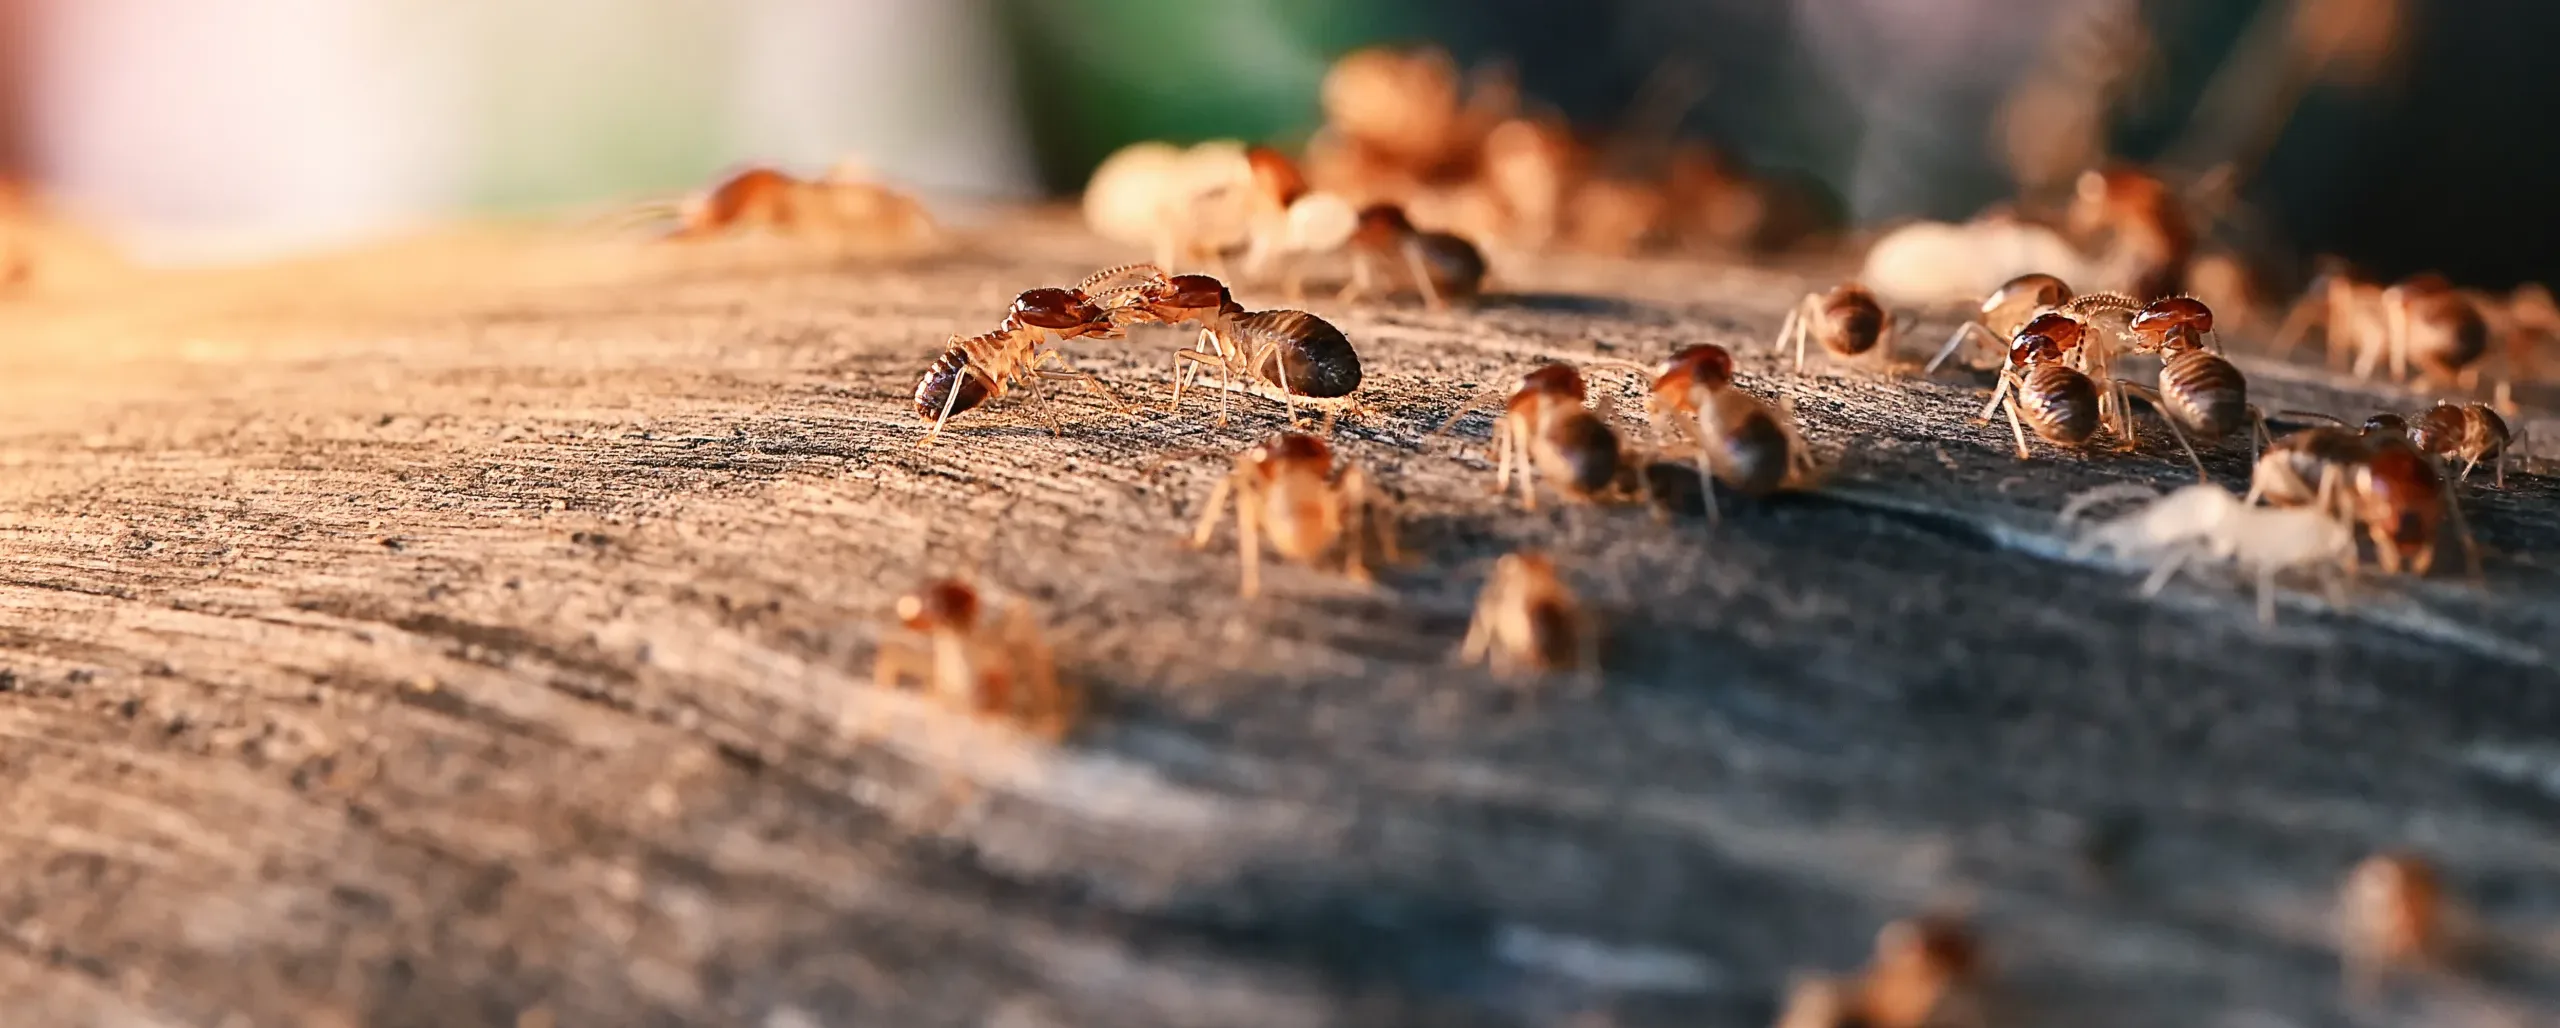 Termites crawling on a Piece of wood in a home